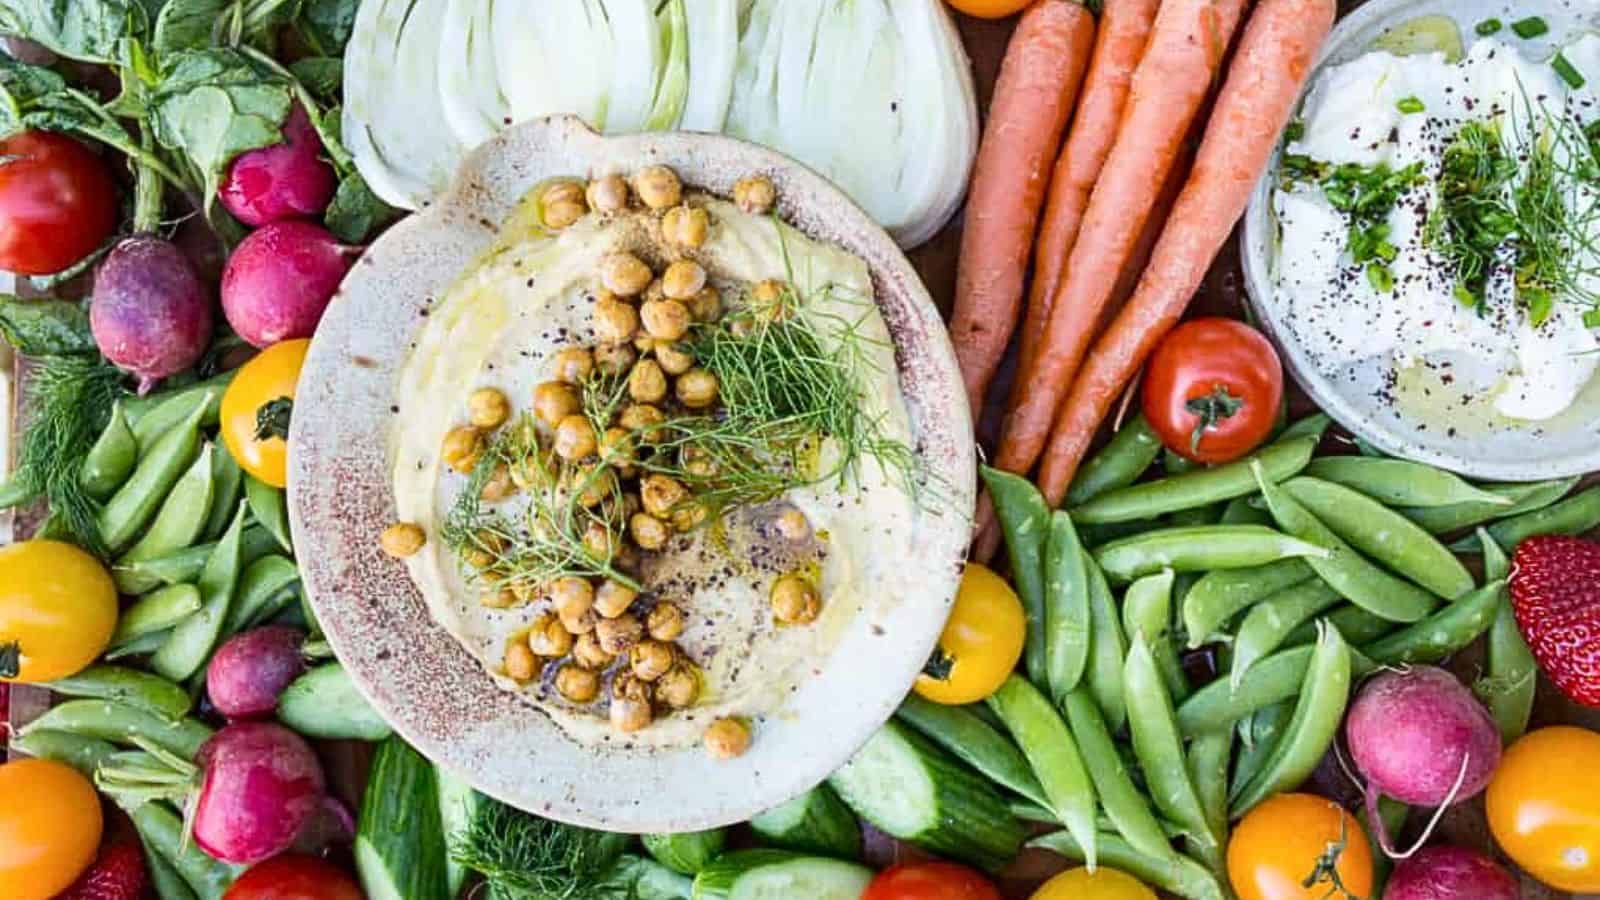 A plate full of vegetables and hummus.